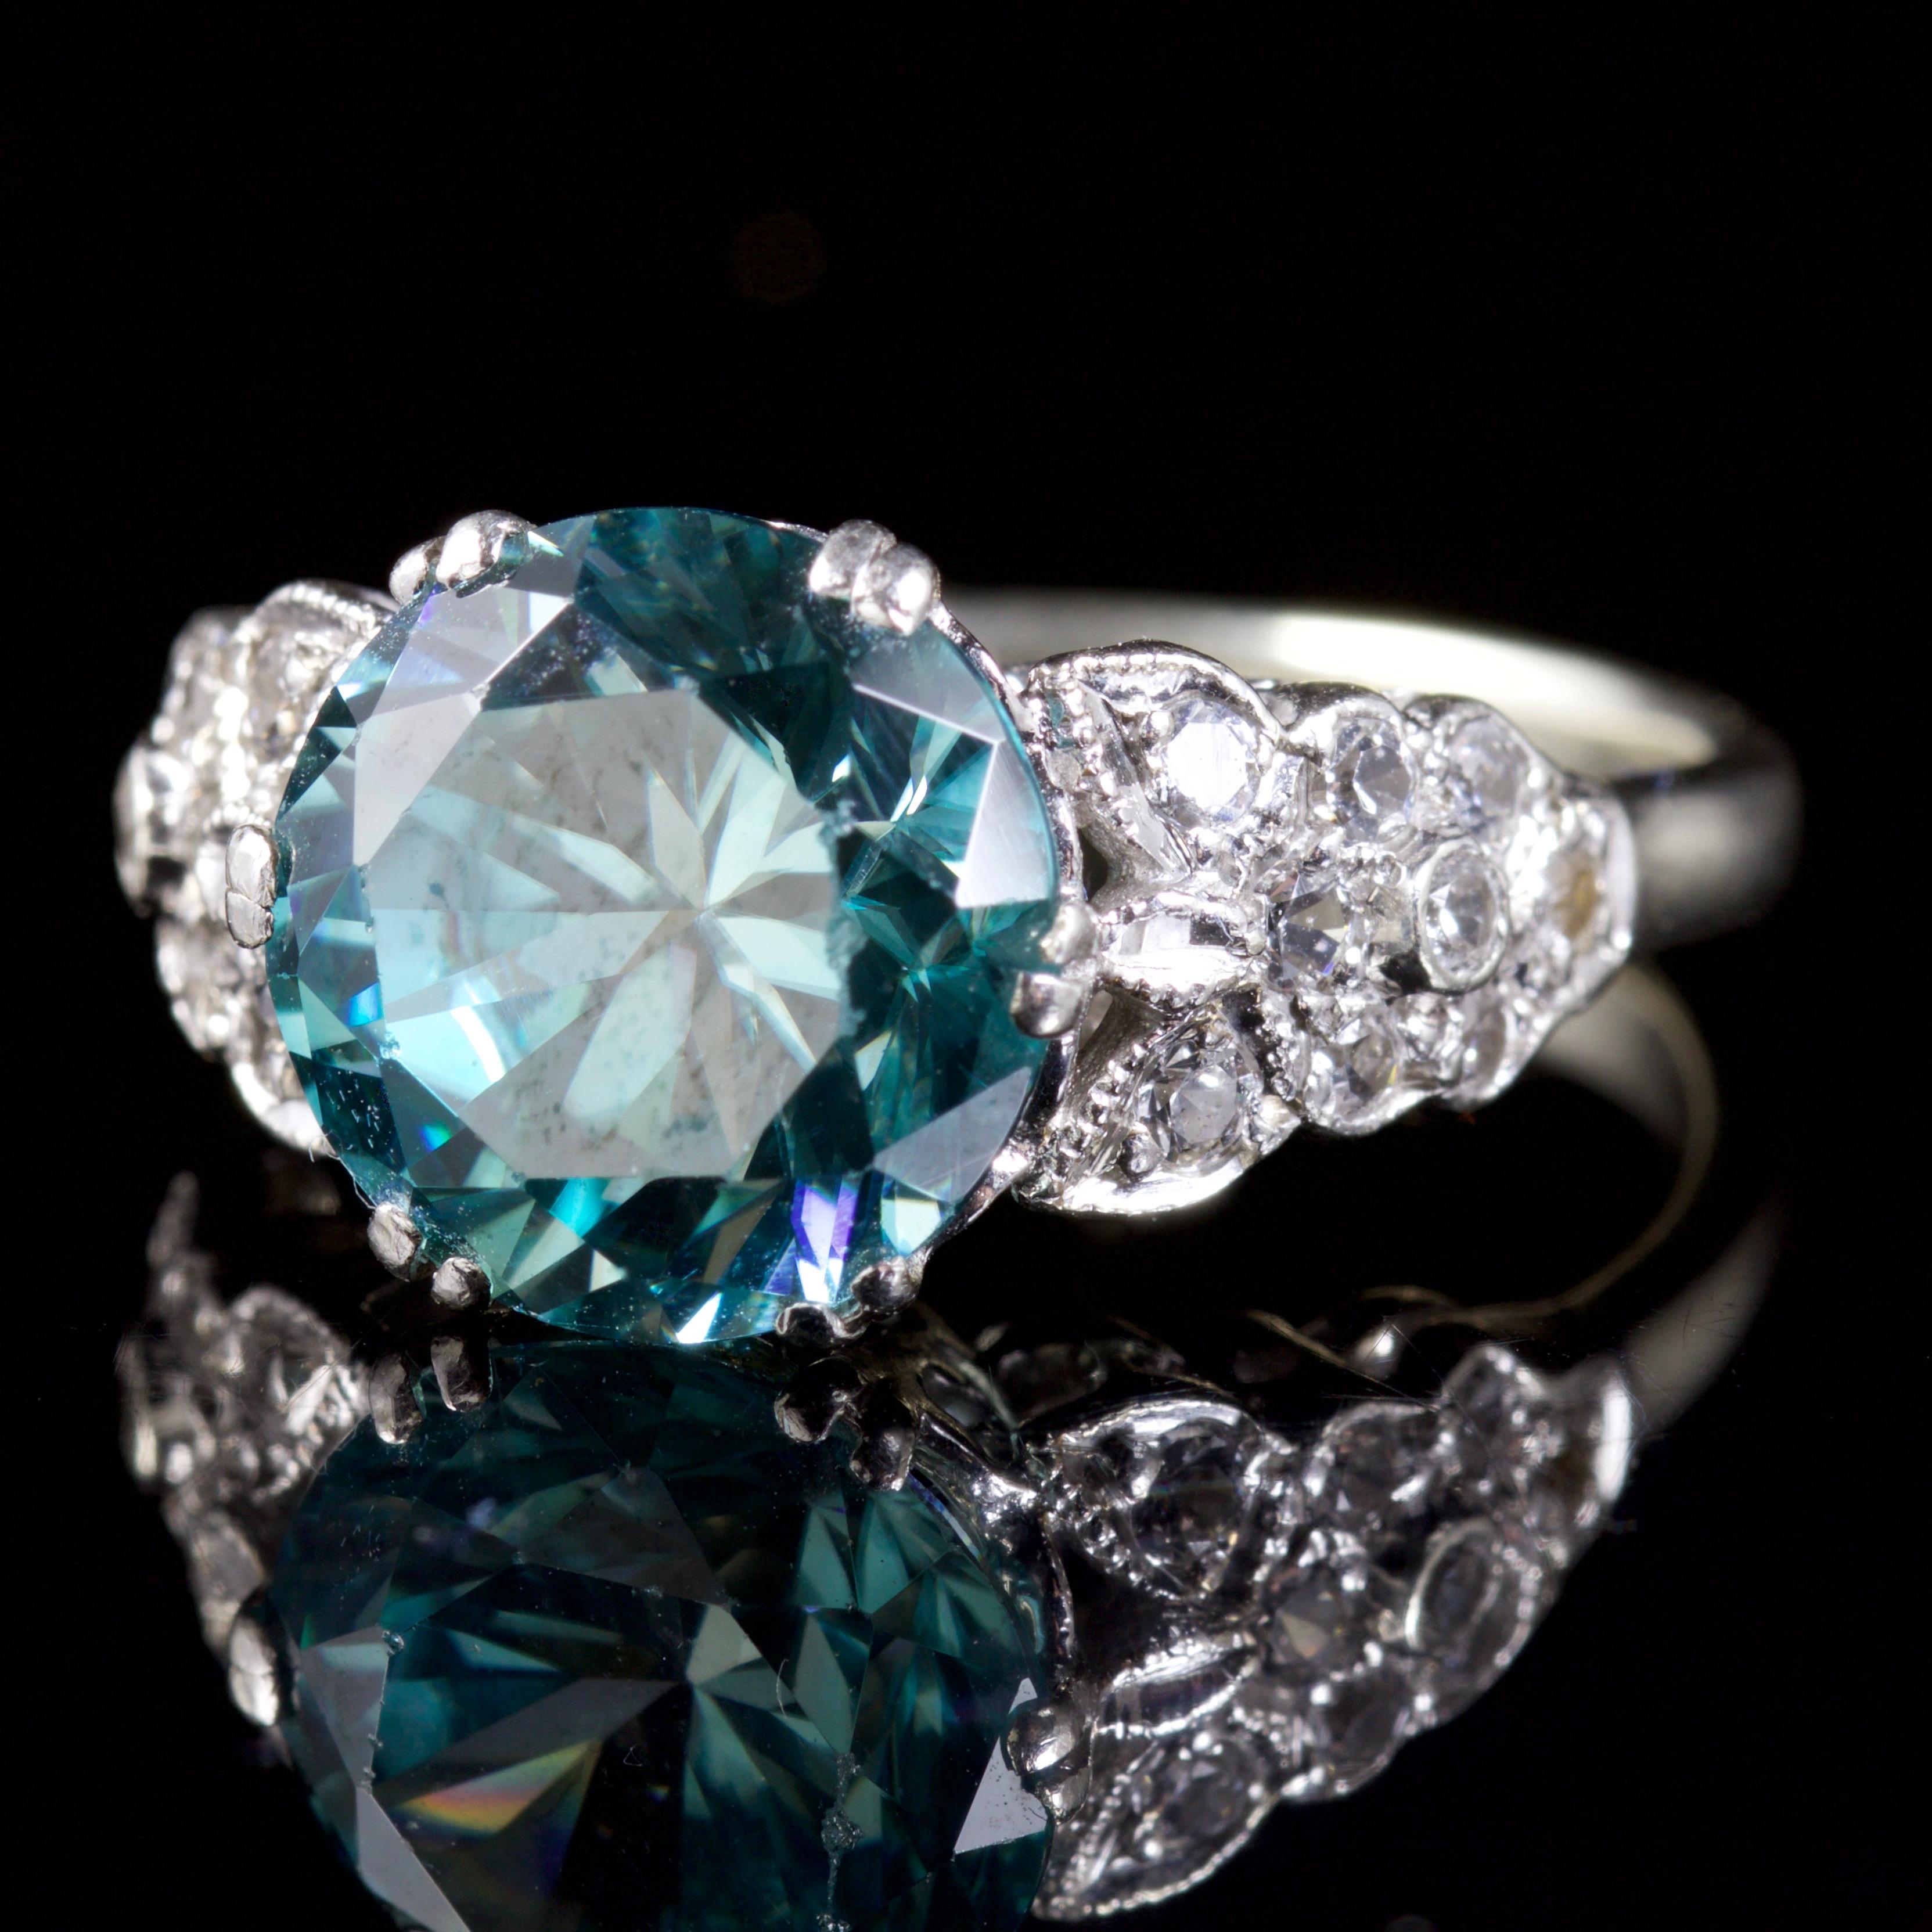 This beautiful Blue Zircon and Spinel ring is Edwardian, Circa 1914.

The ring boasts a 3.5ct Zircon in the centre, with beautiful white Spinels encrusted into both shoulders.

The white Spinels are fantastic, forever sparkling against the White